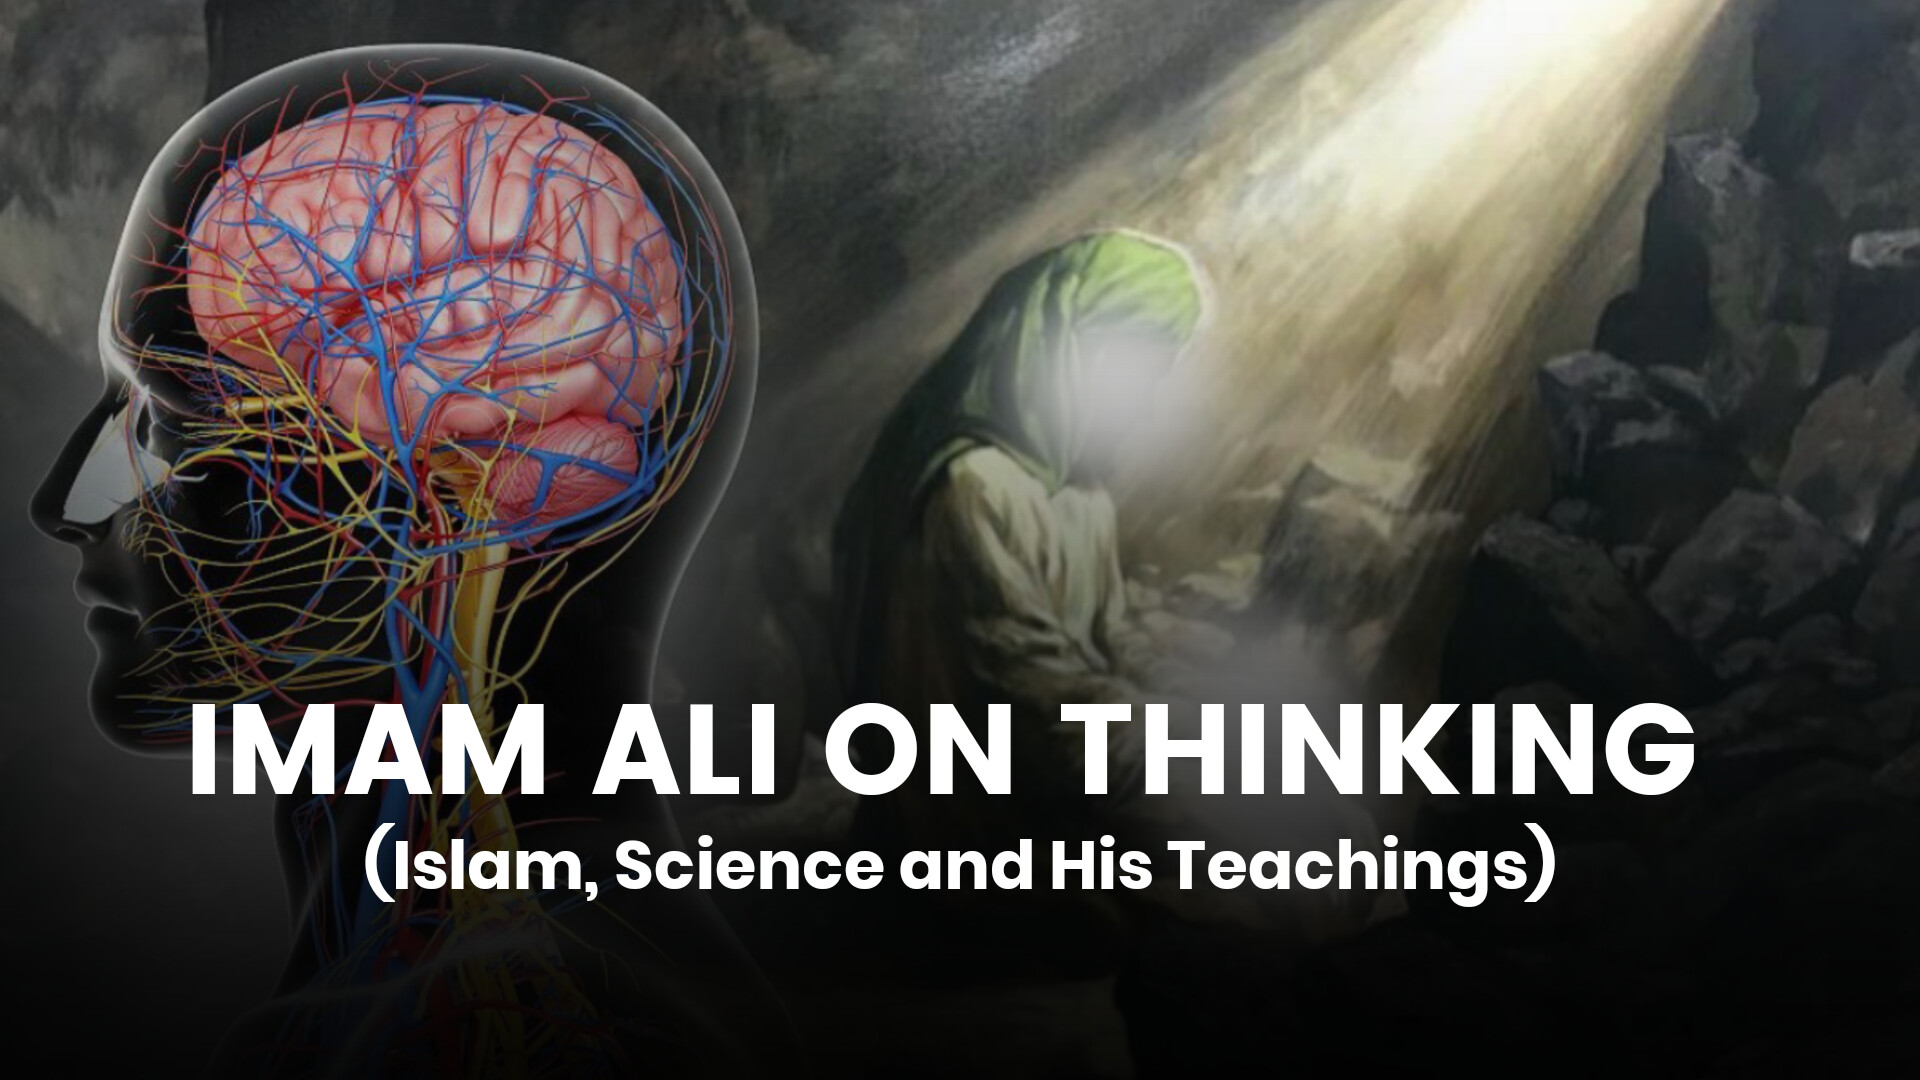 Imam Ali on Thinking (Islam, Science and His Teachings)